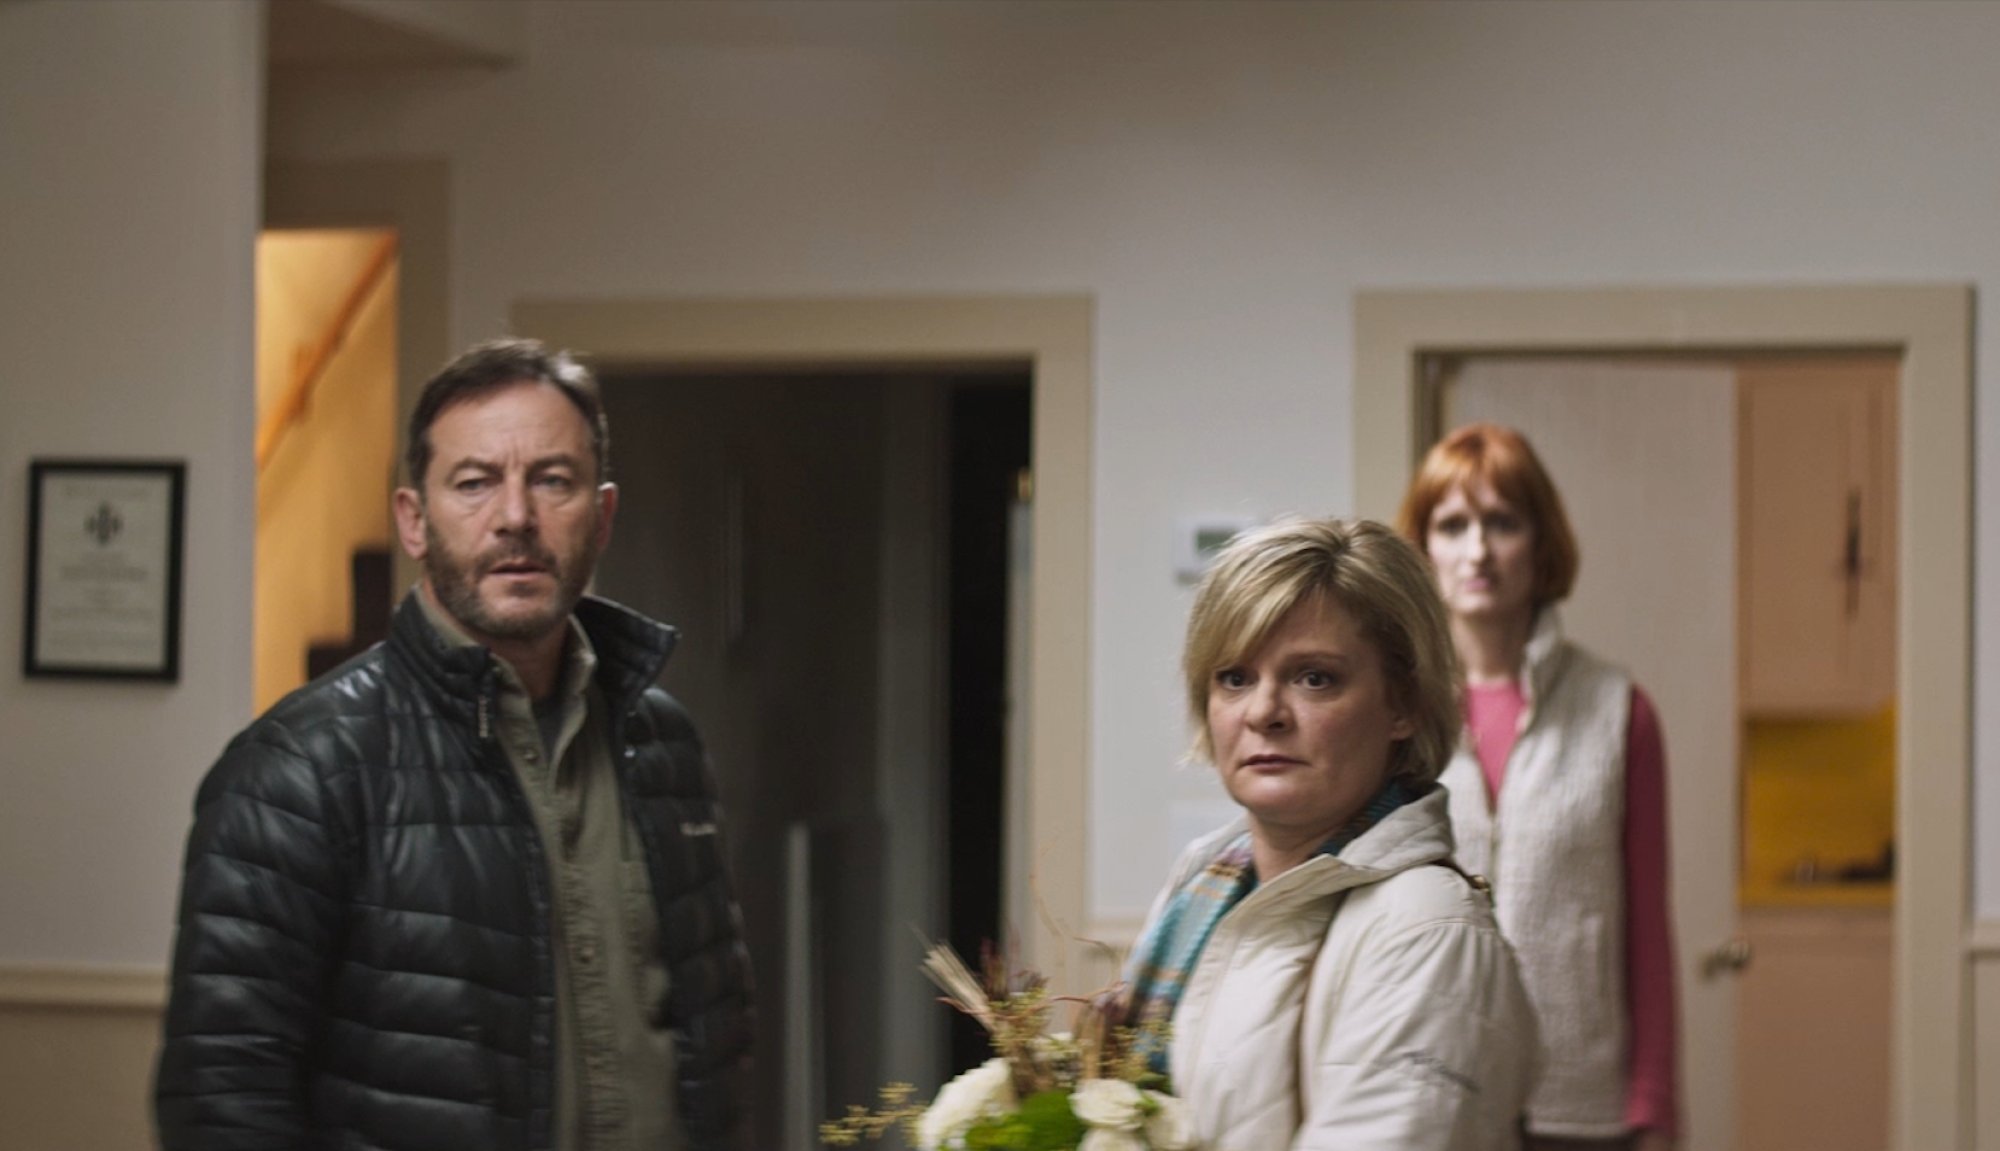 Jason Isaacs and Martha Plimpton play the parents of a school shooting victim in "Mass."